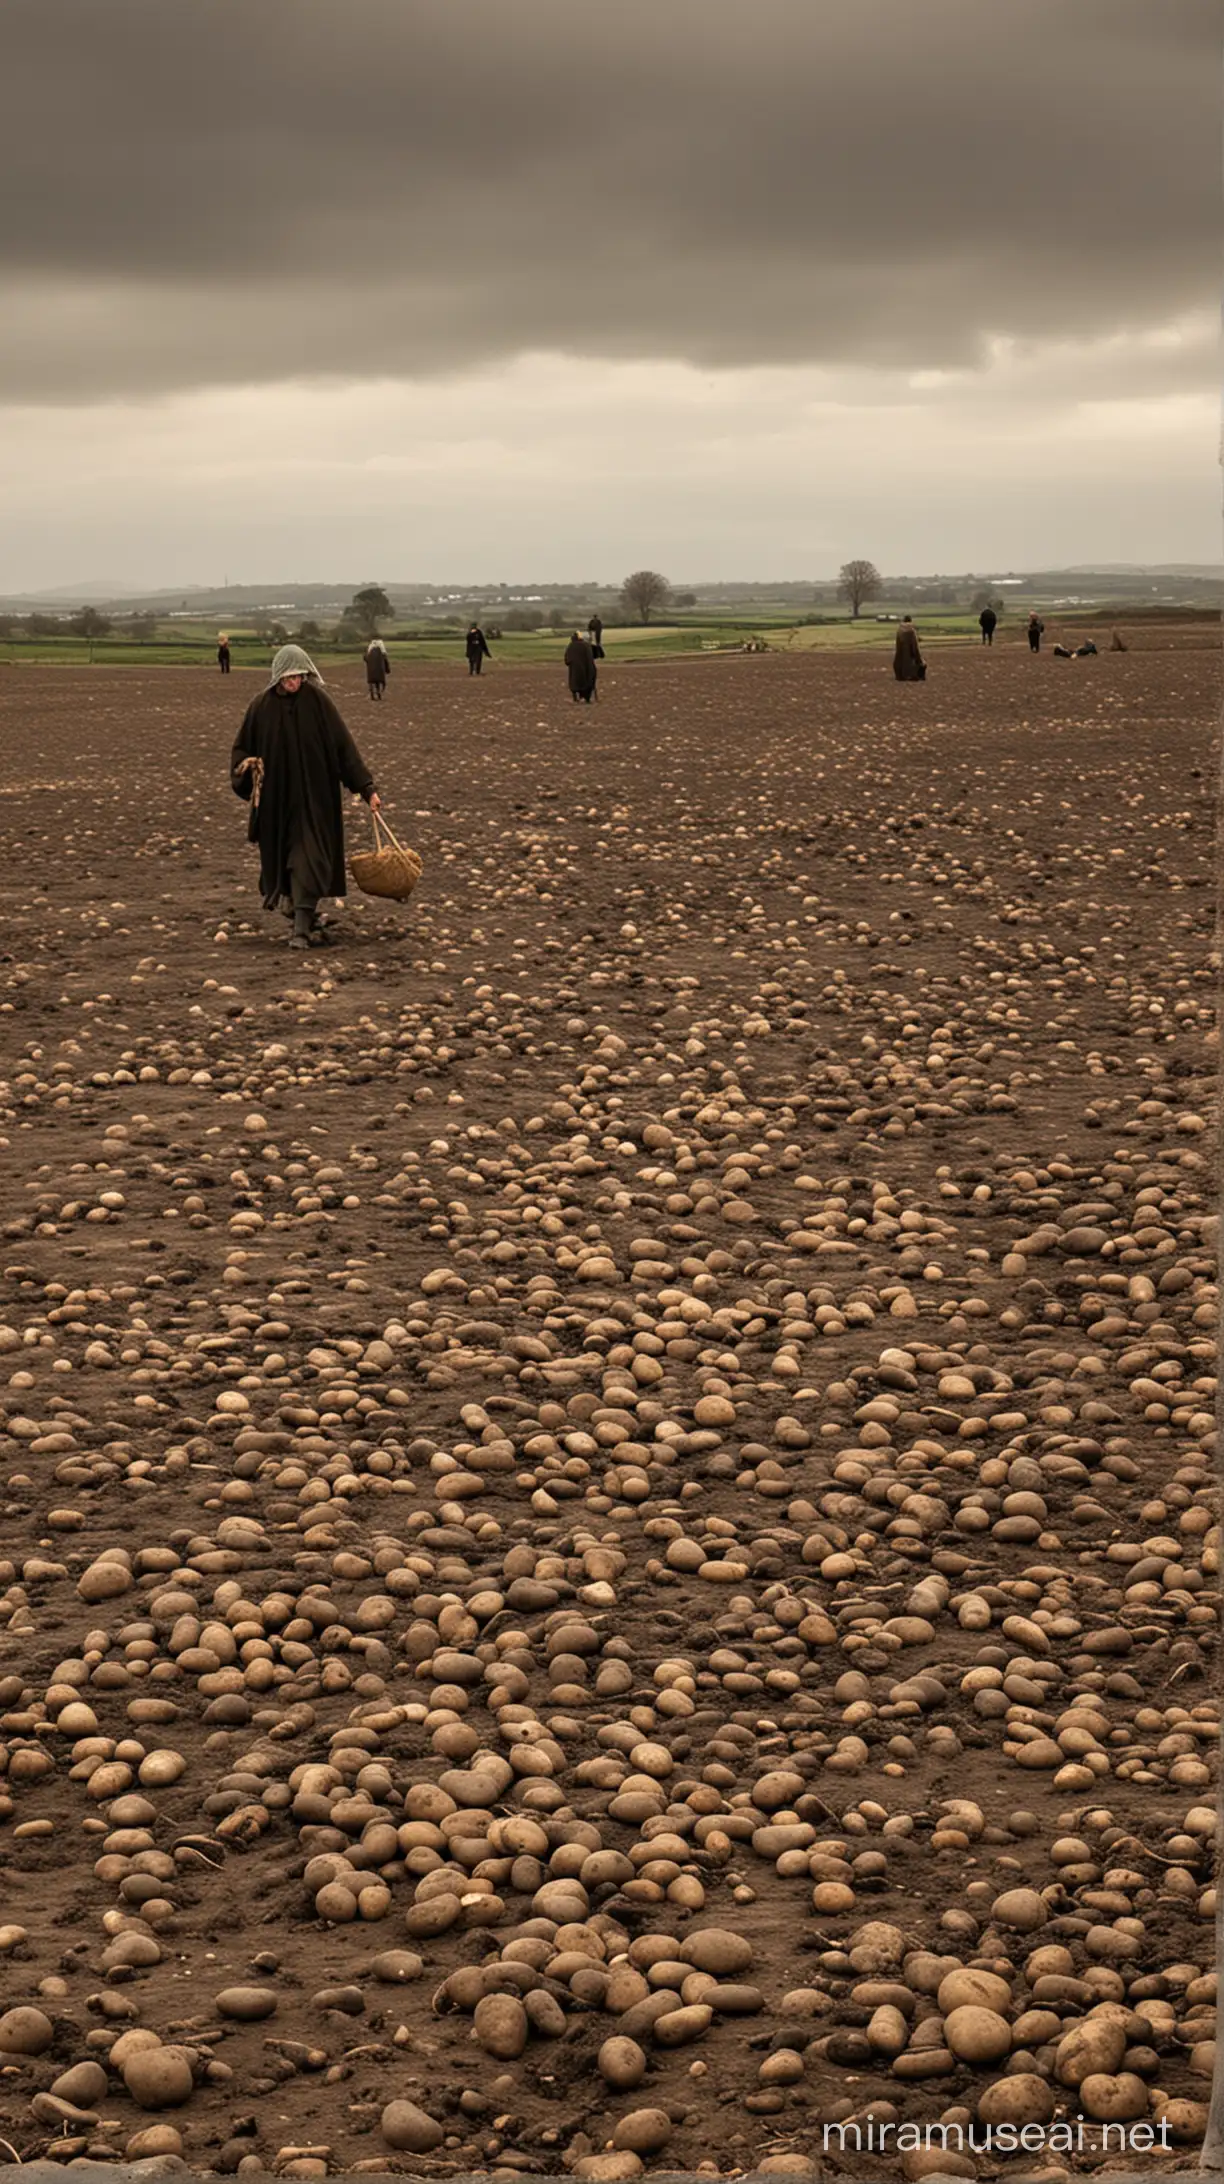 Impact of the Potato Famine Depiction of Starvation and Loss in Ireland